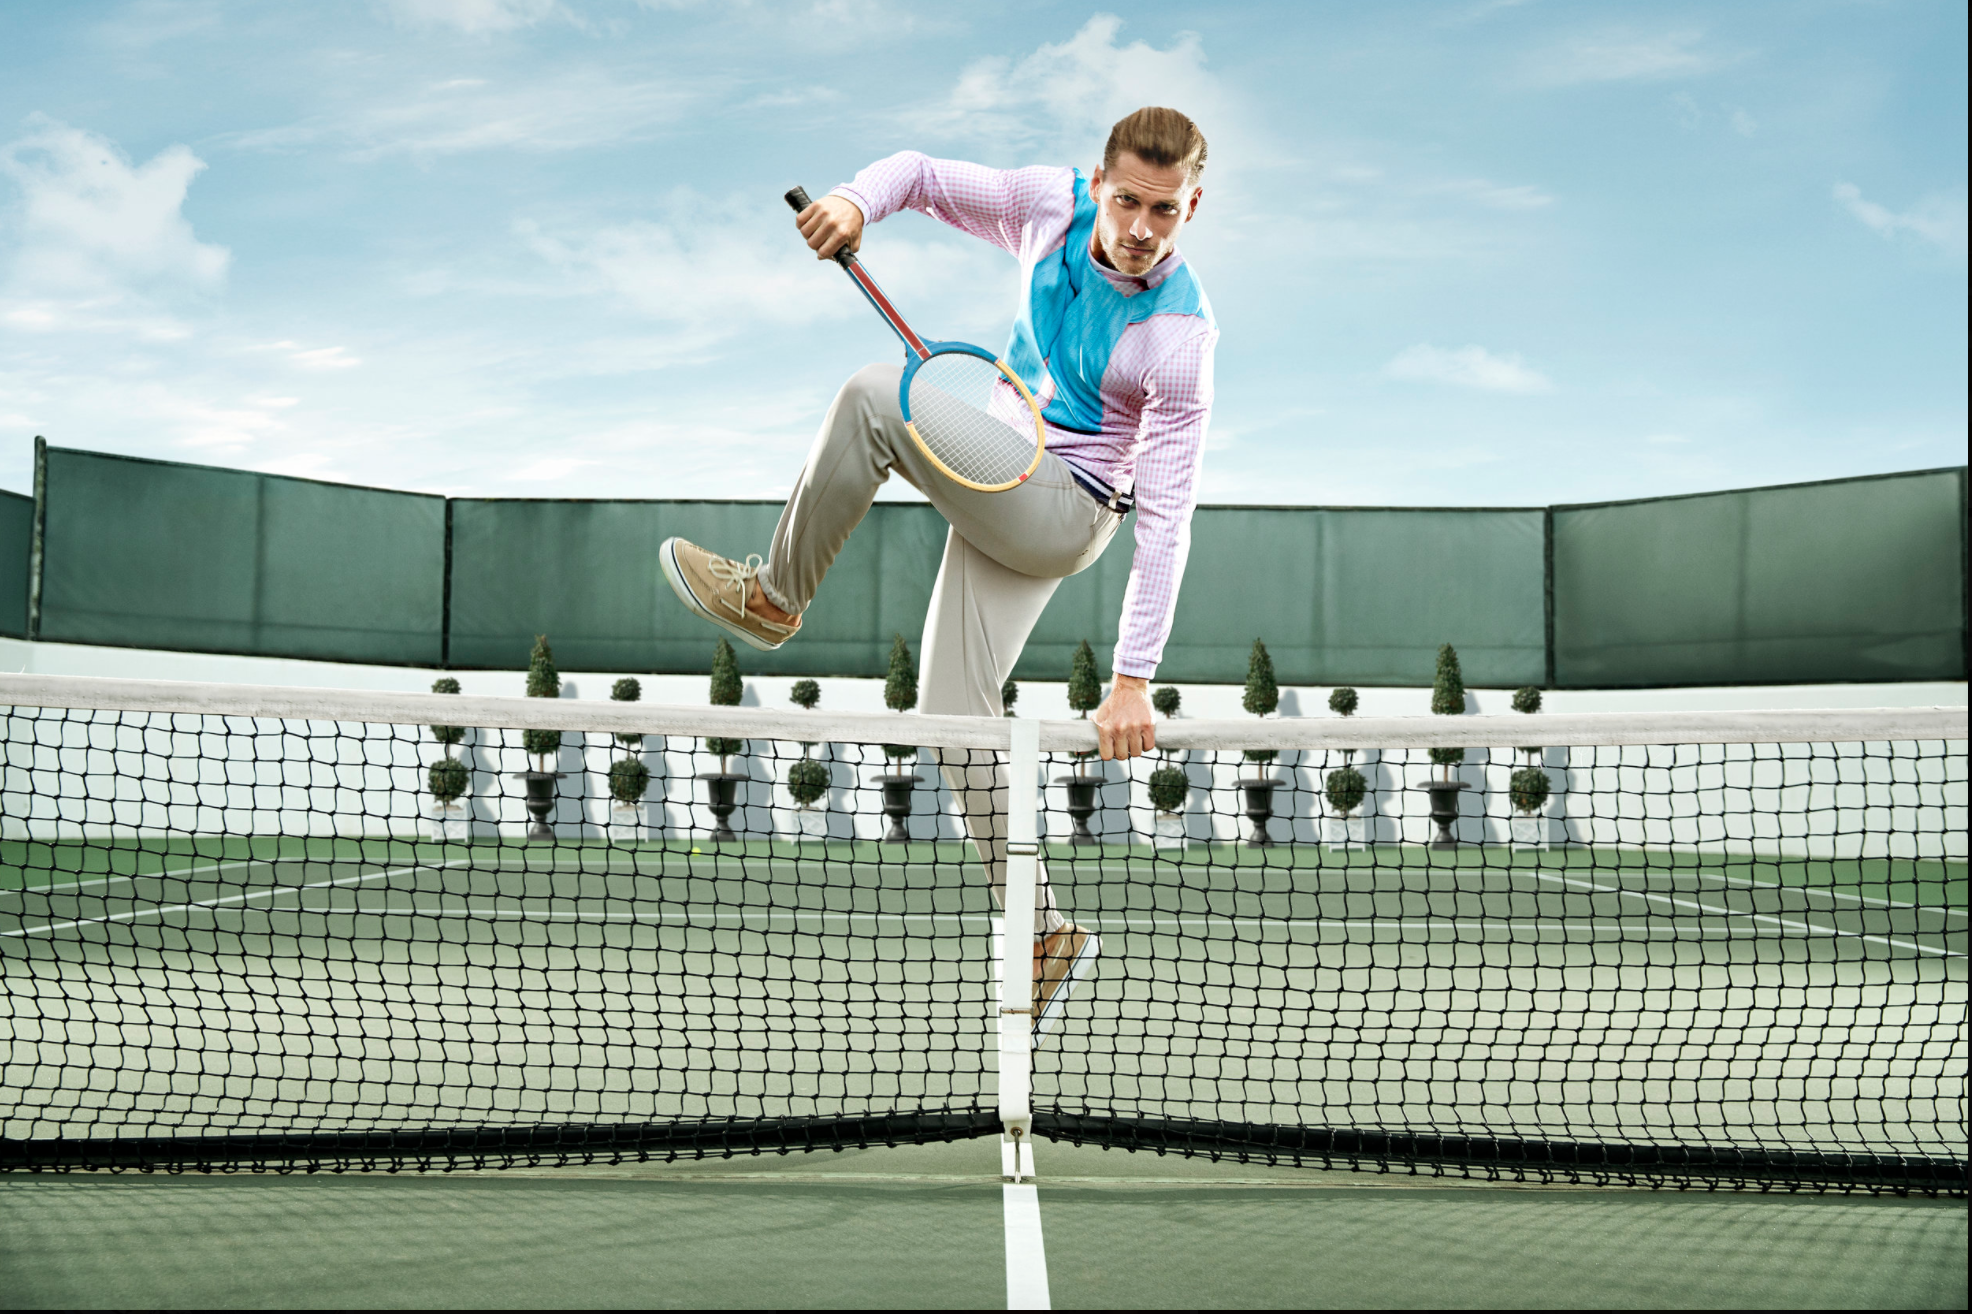  Fruit of the loom handsome man model jumping over tennis net 